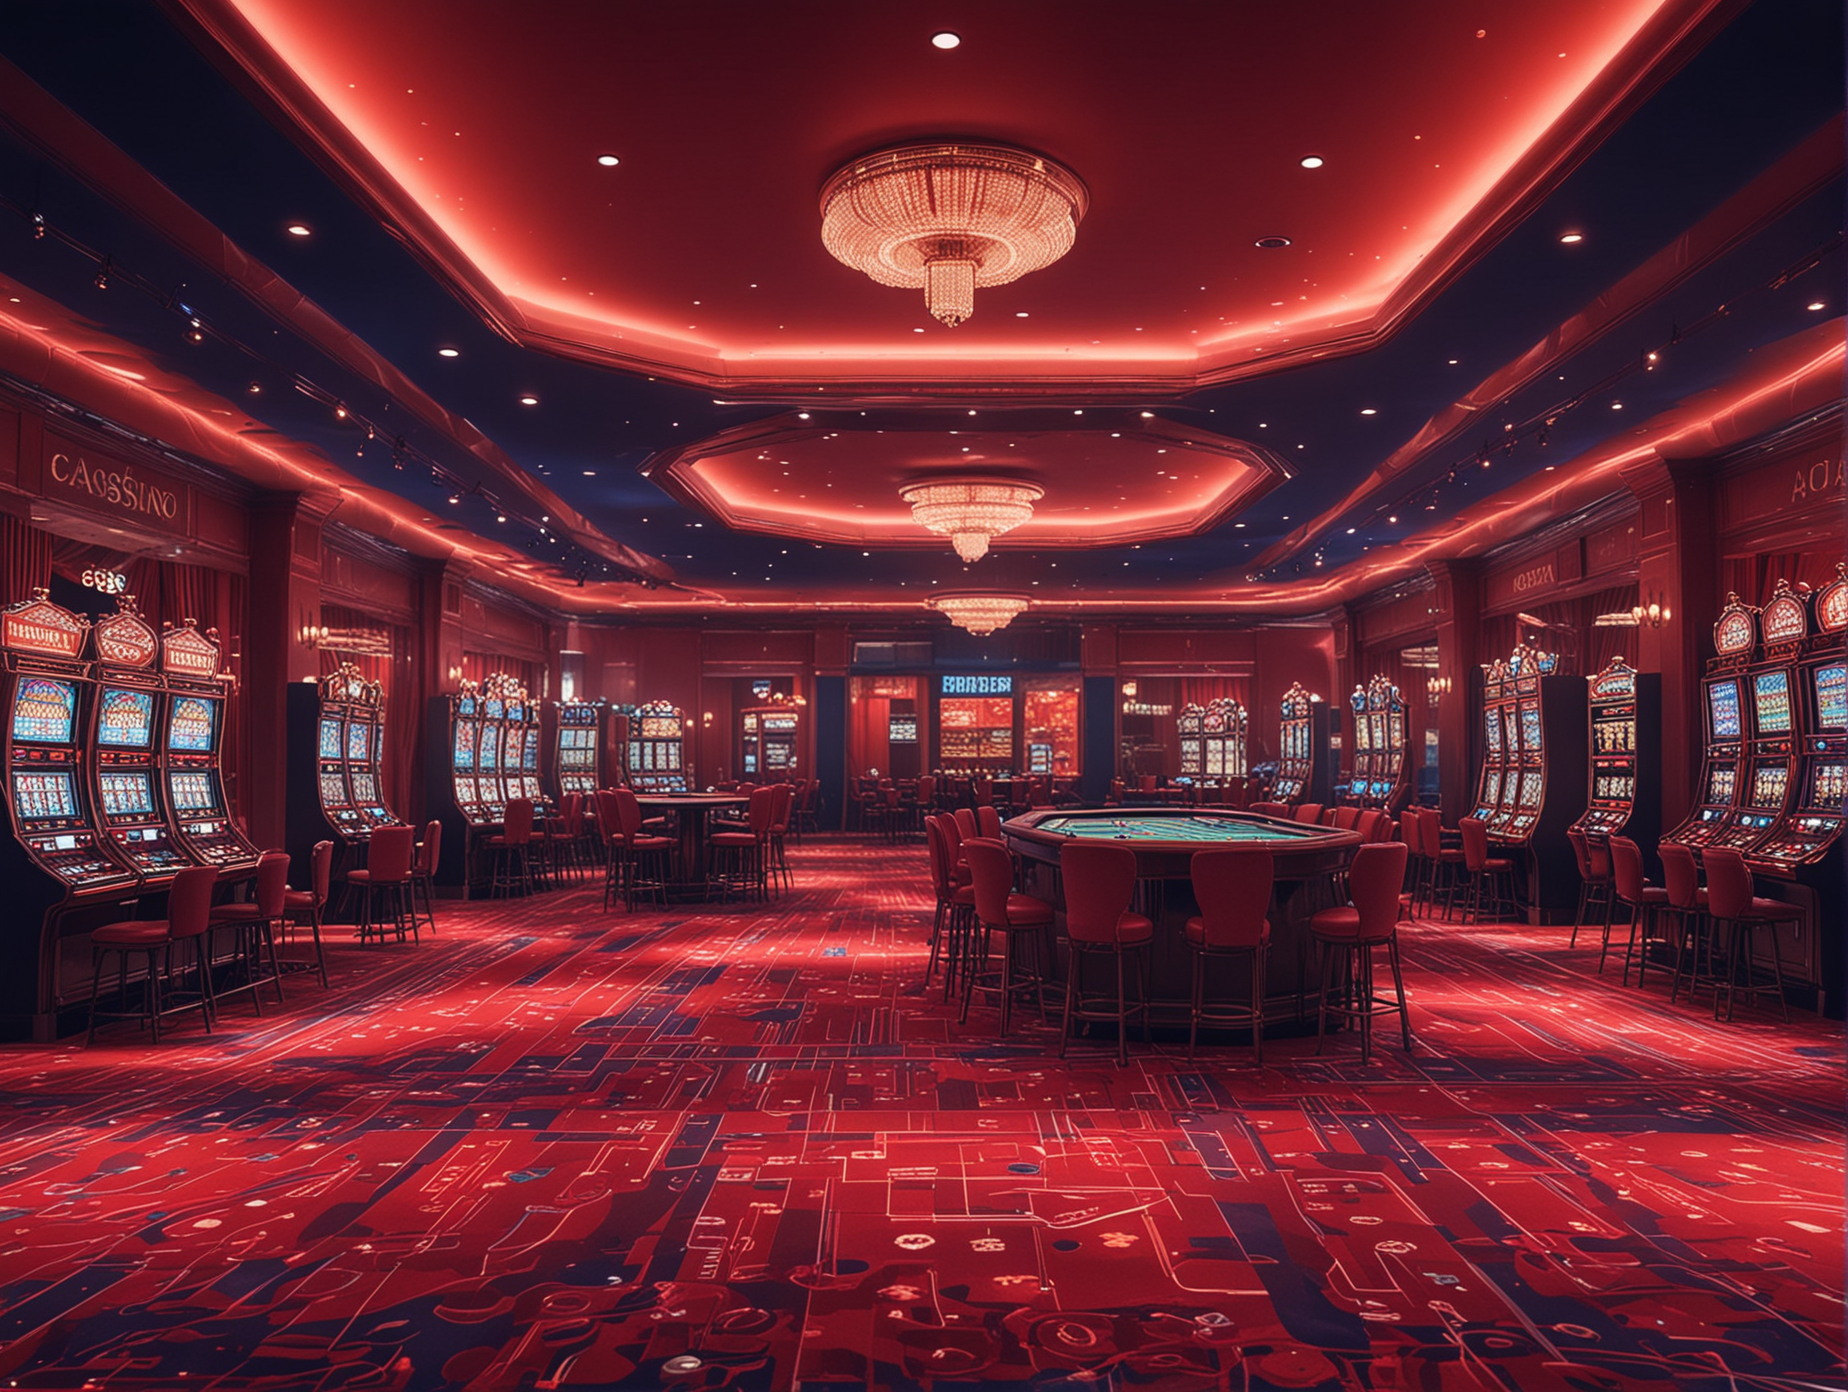 Vibrant Casino Interior Design with HighDefinition Bright Red and Dark Blue Atmosphere